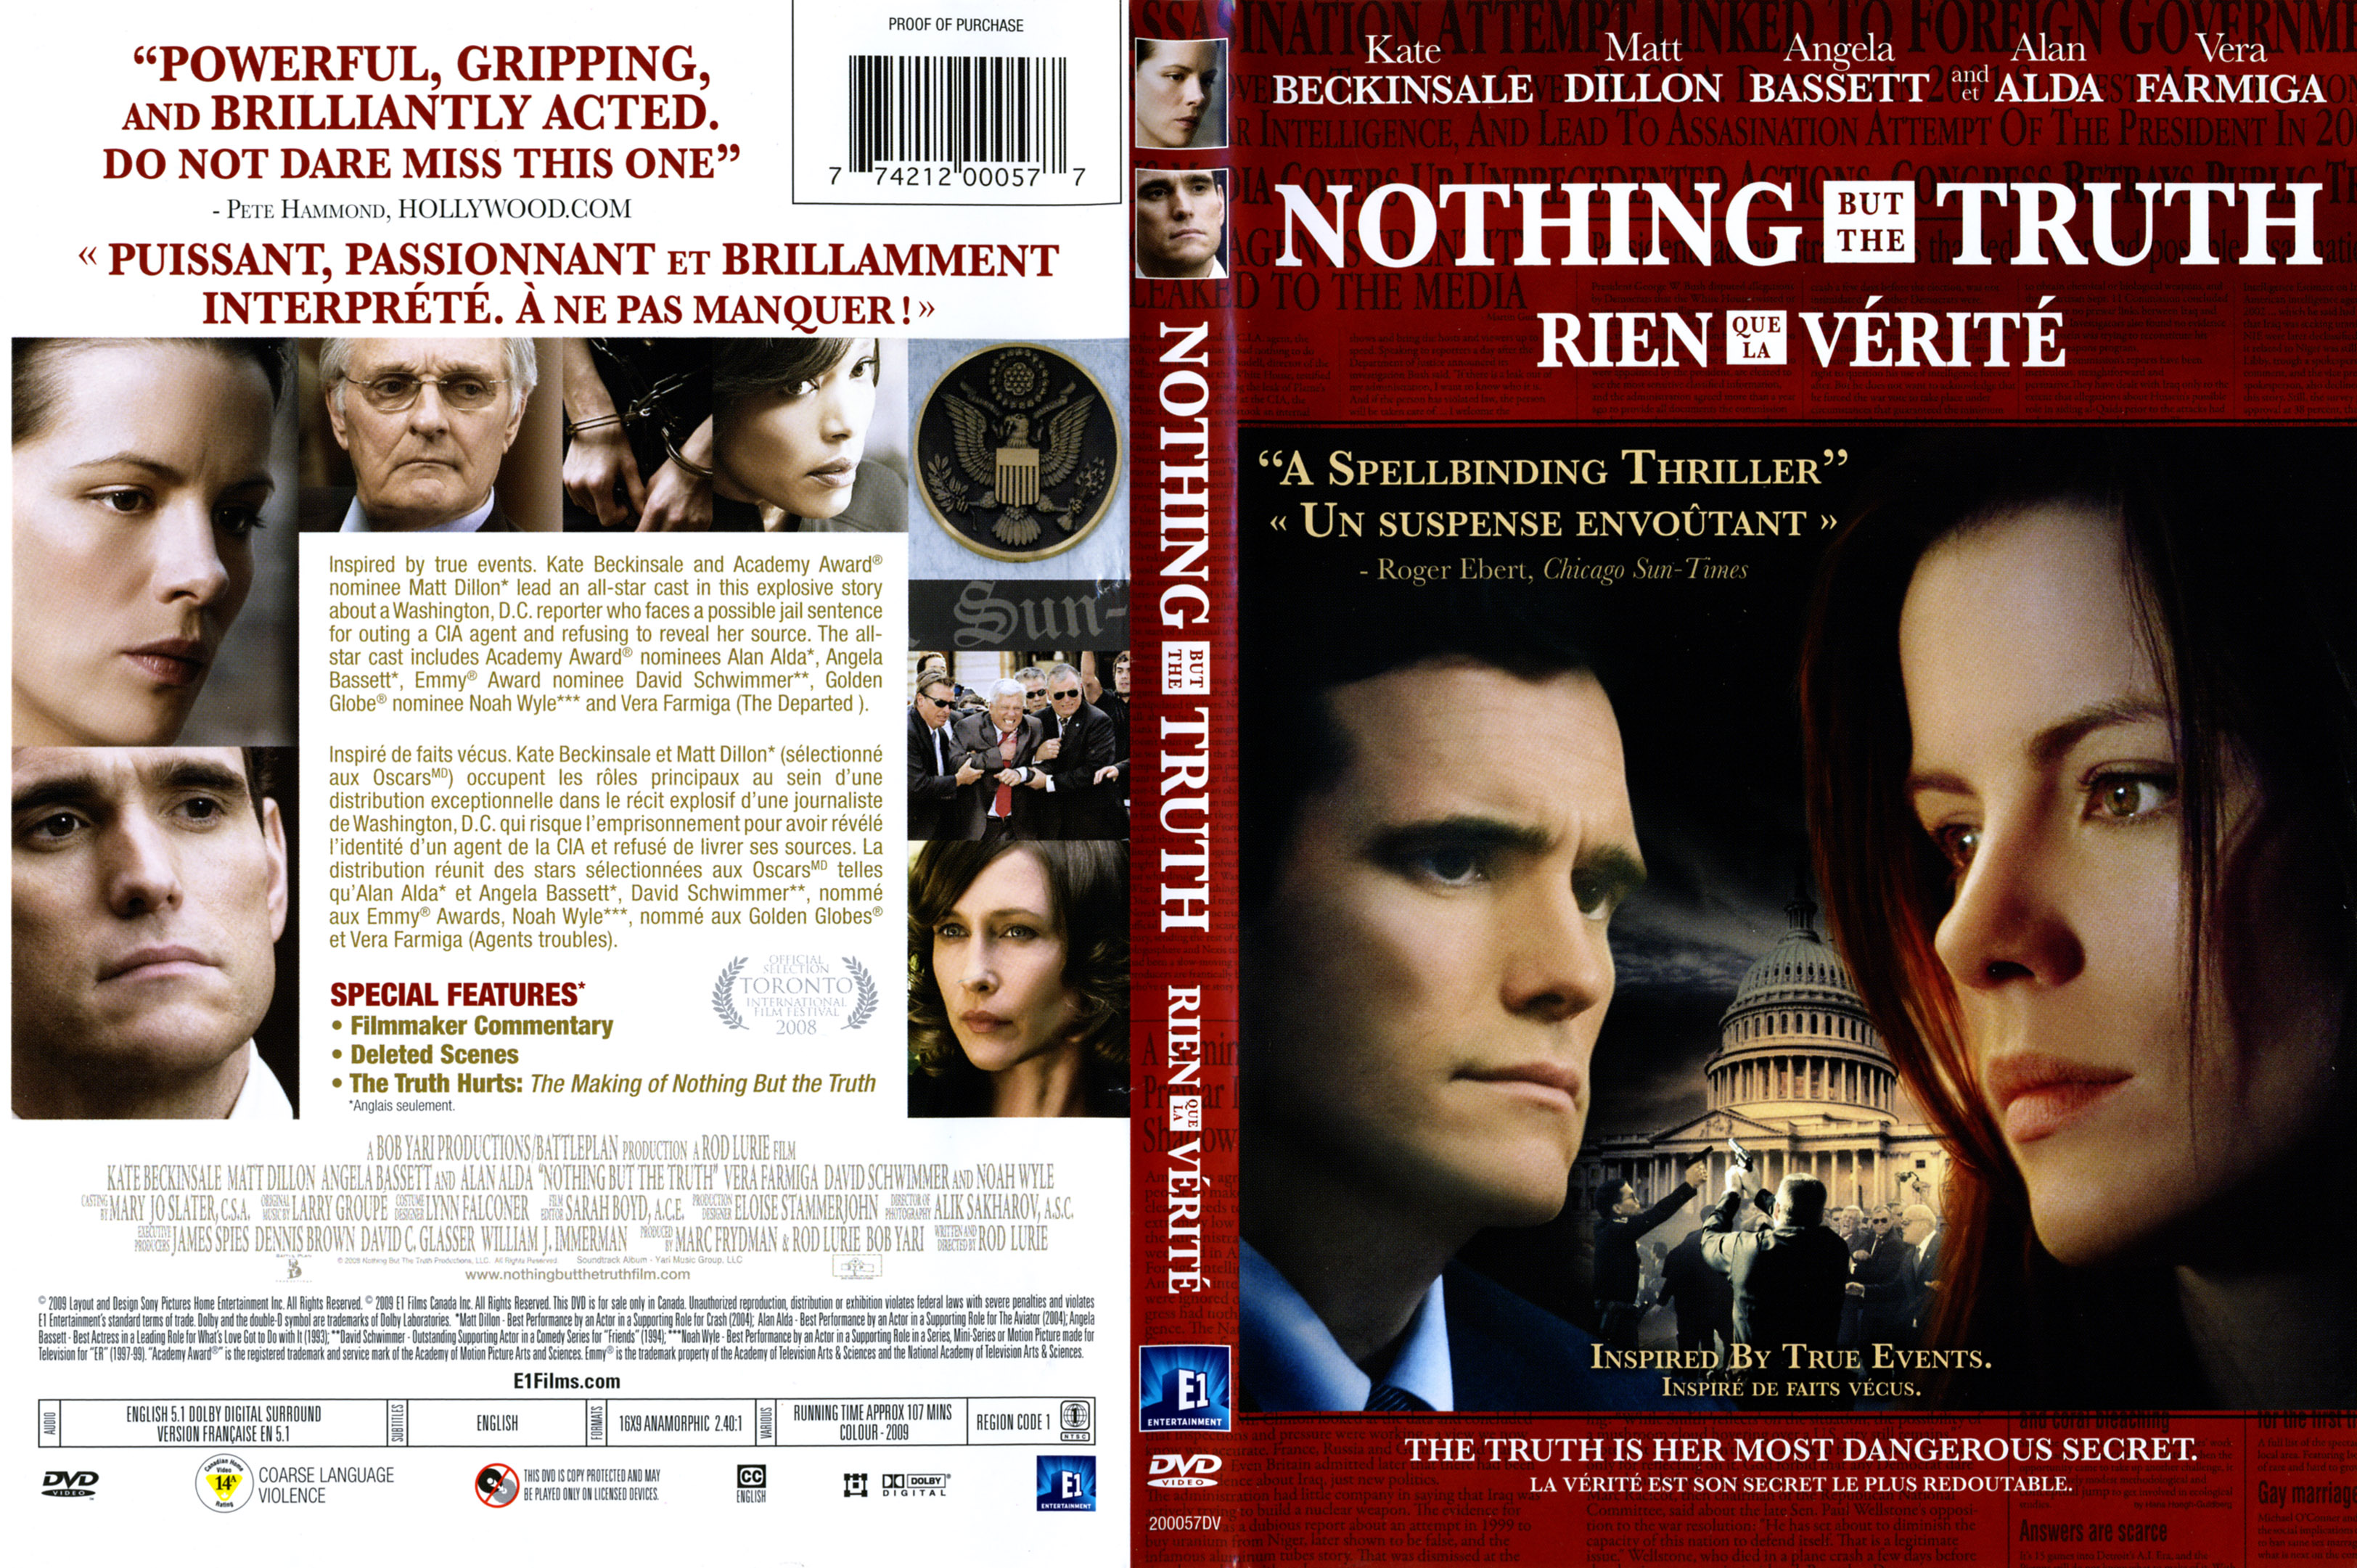 Jaquette DVD Rien que la verite - Nothing but the truth (Canadienne)